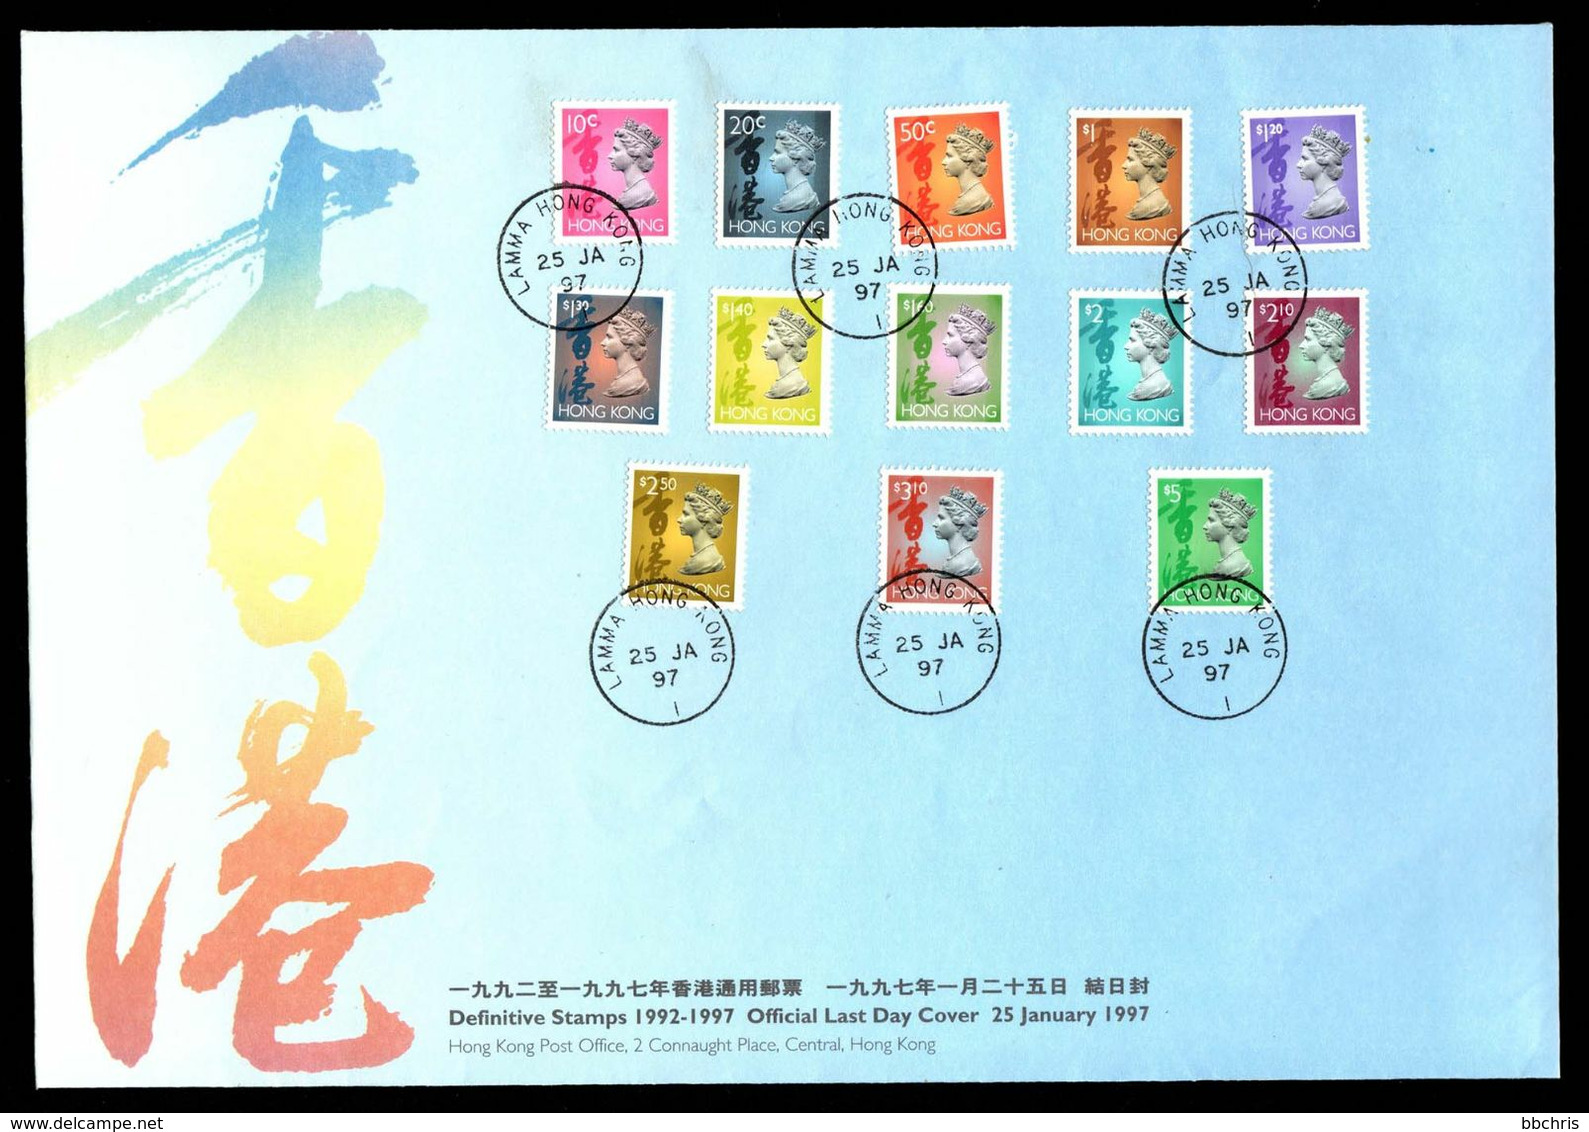 Last Day Cover 1997 Hong Kong Definitive Stamps 1992 - 1997 Lamma Postmark 2nd - FDC